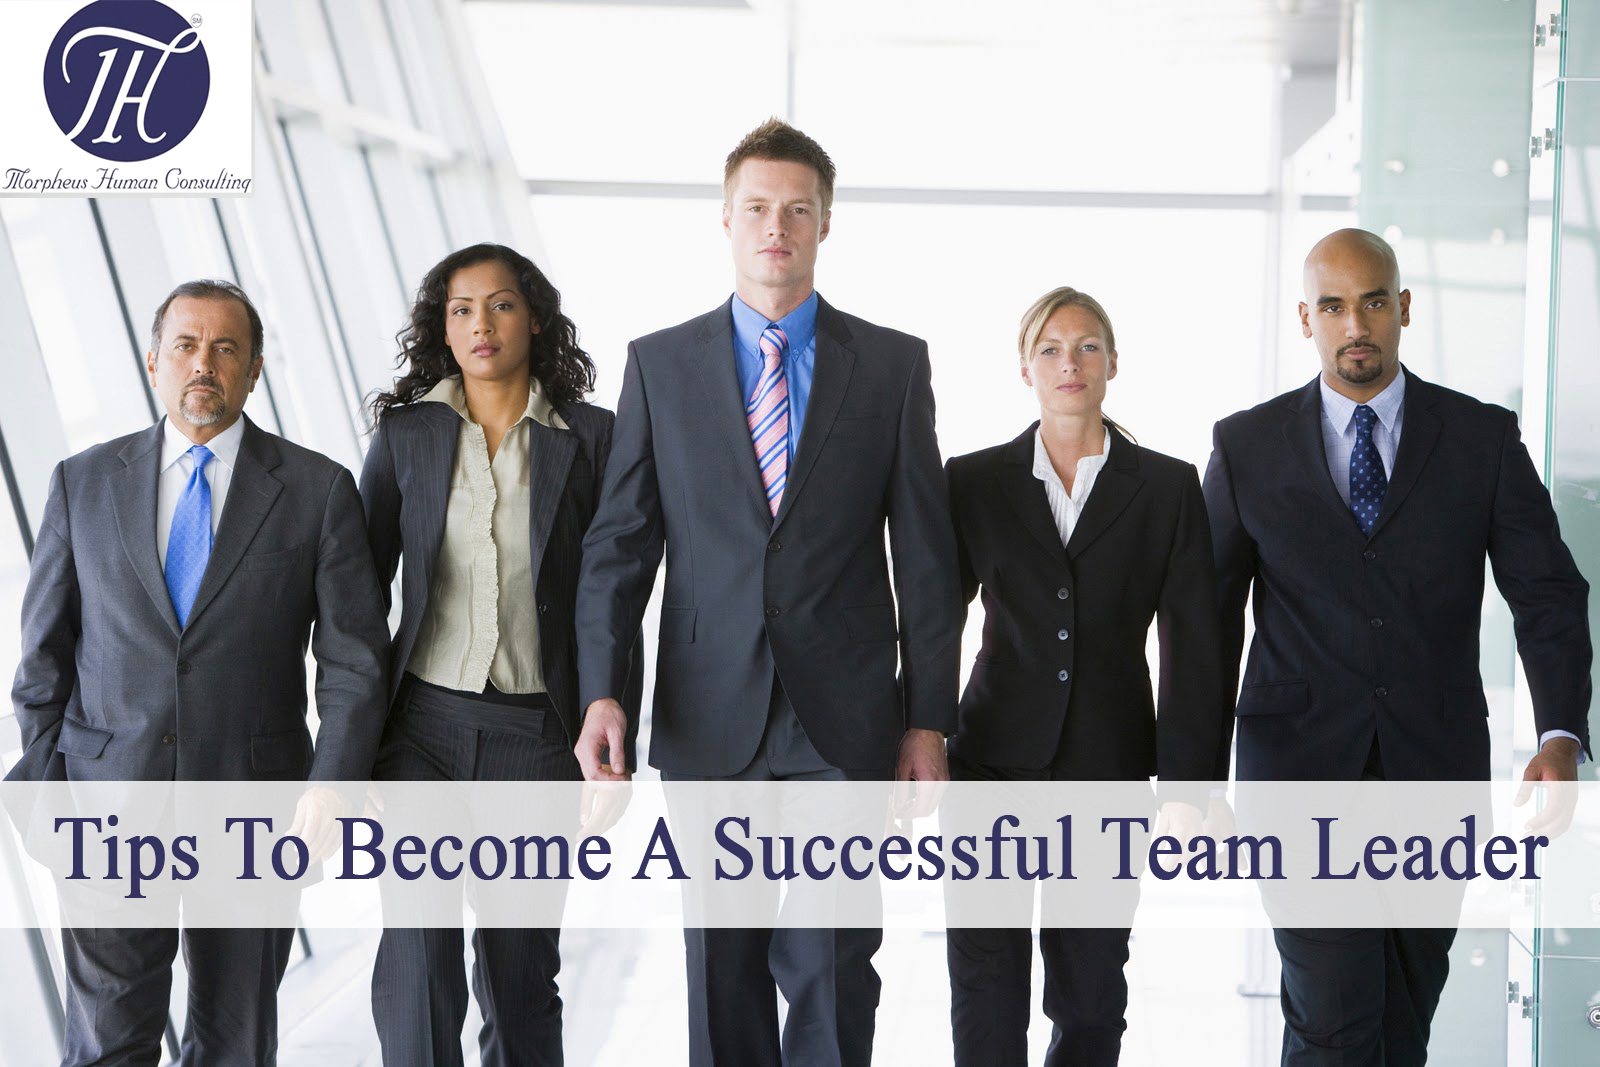 Top 8 Tips And Qualities To Become A Successful Team Leader